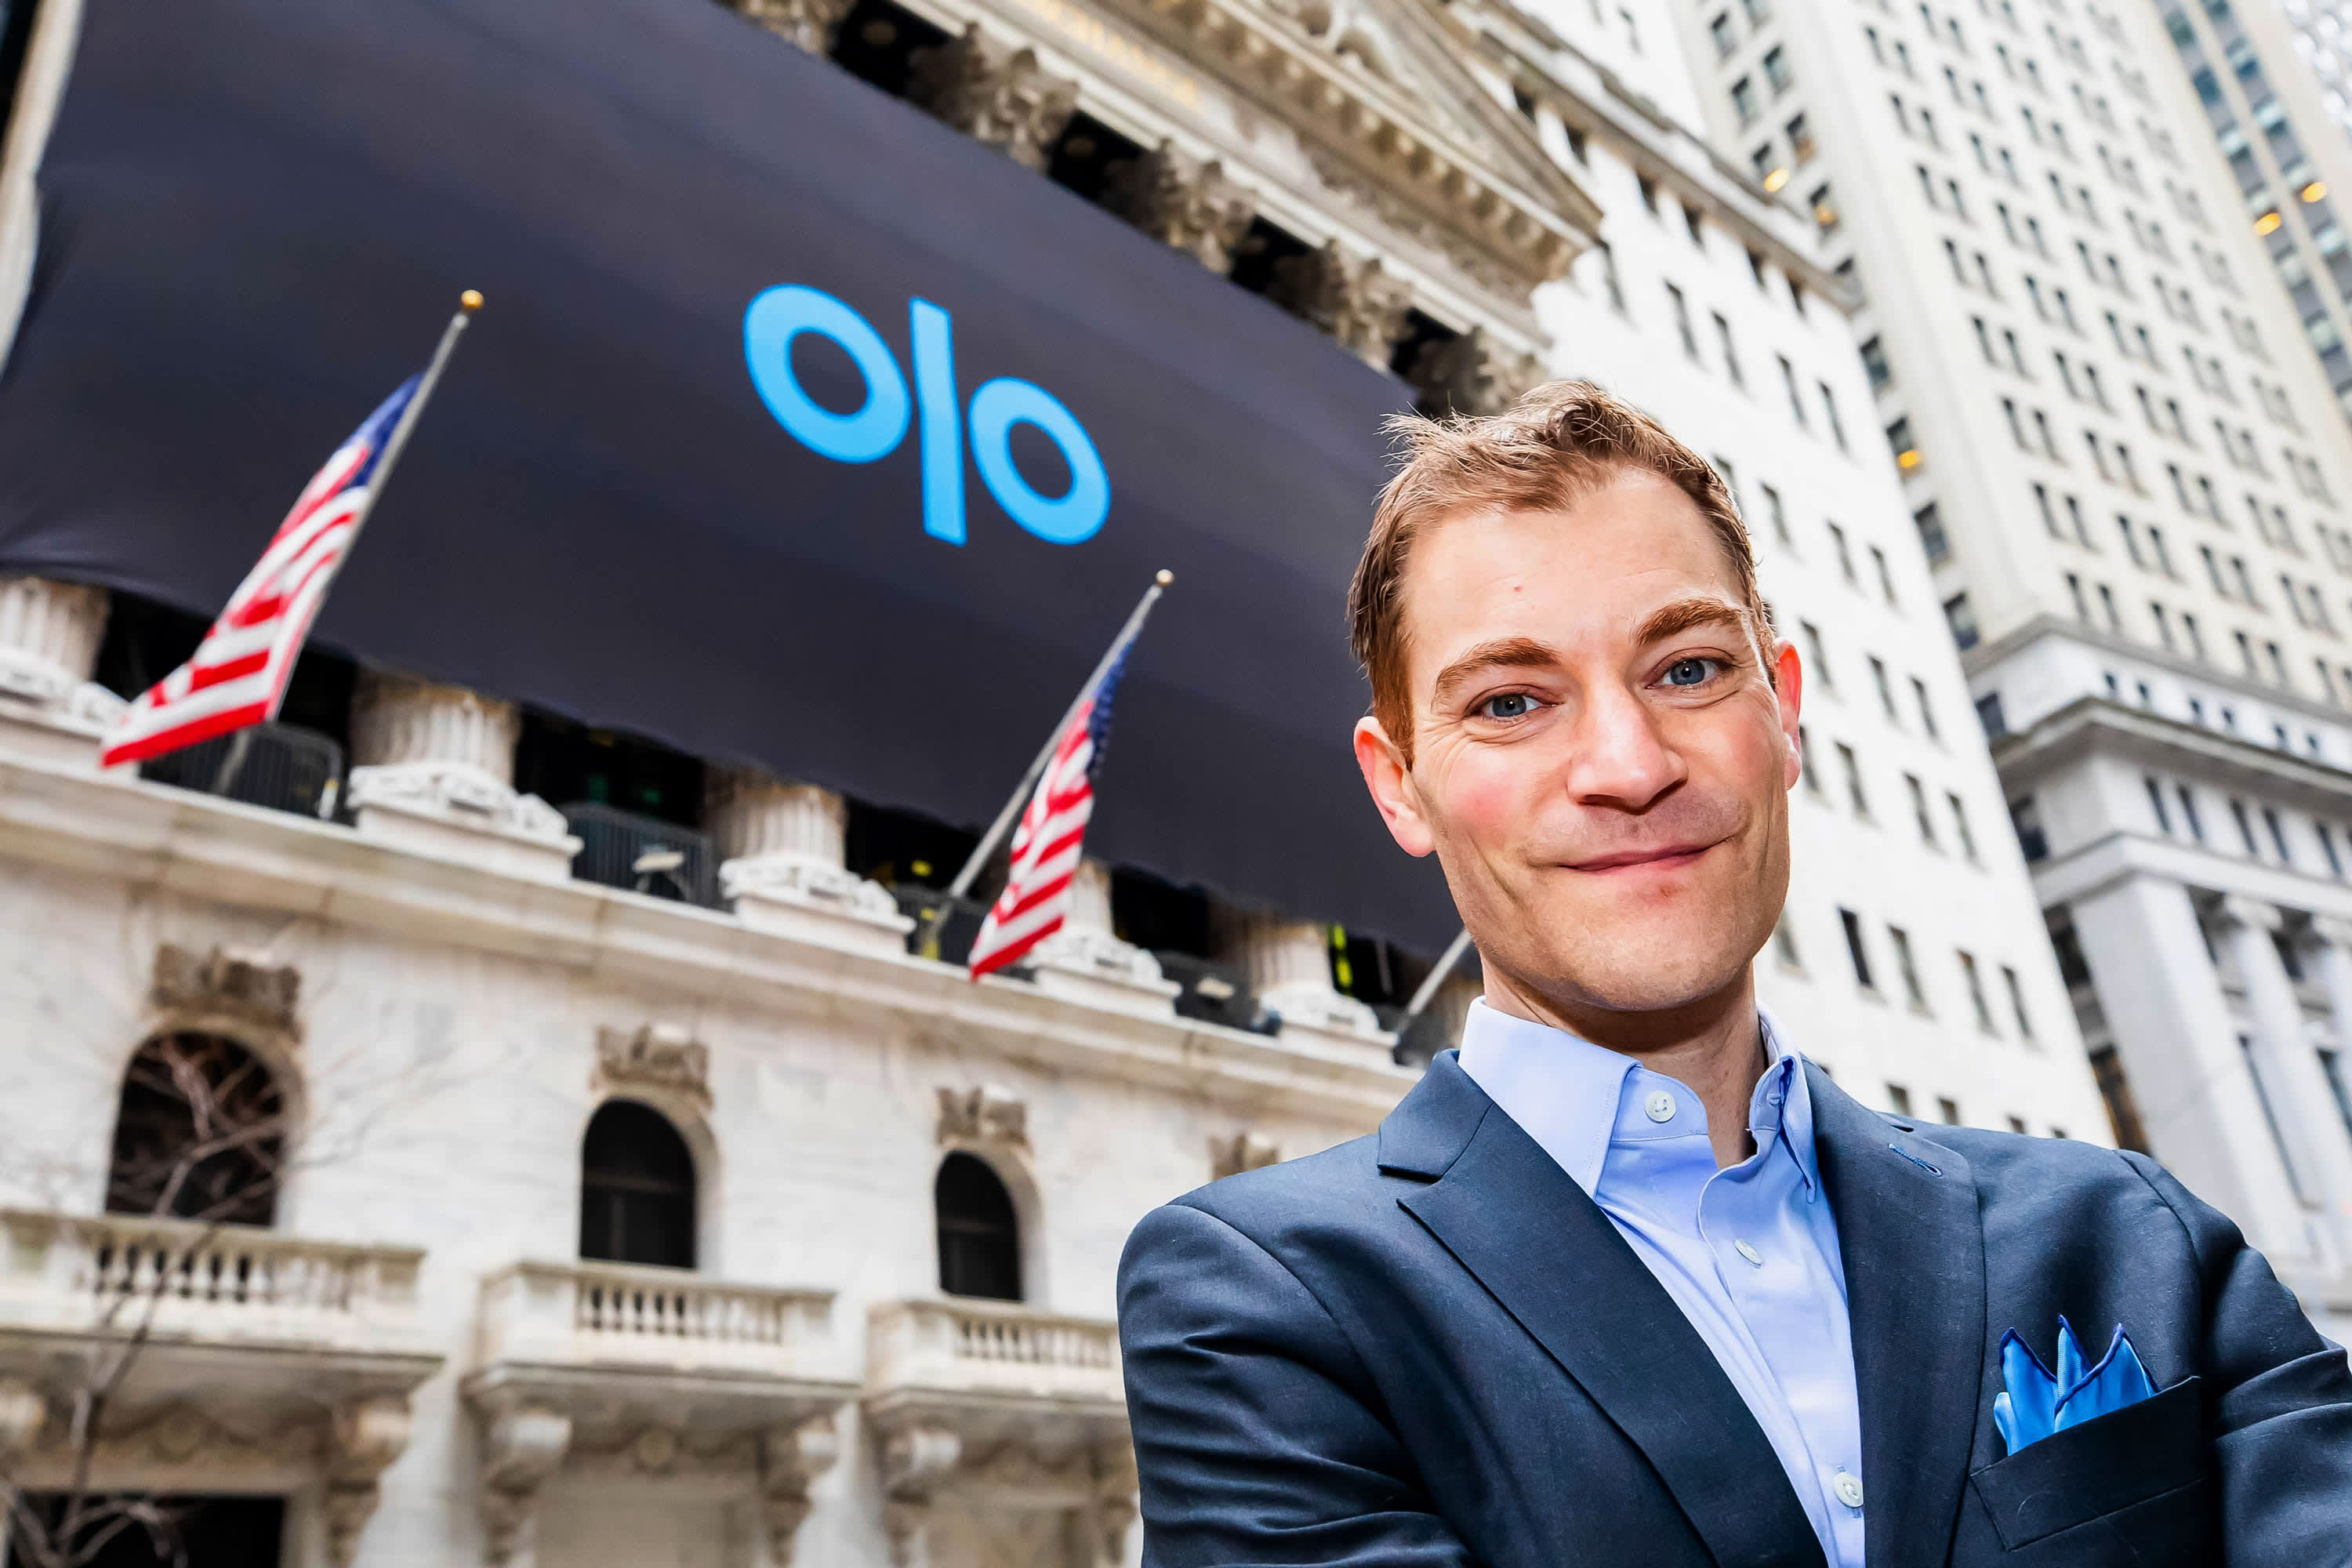 Olo, a restaurant technology company, grows by more than 20% in IPO as online orders grow